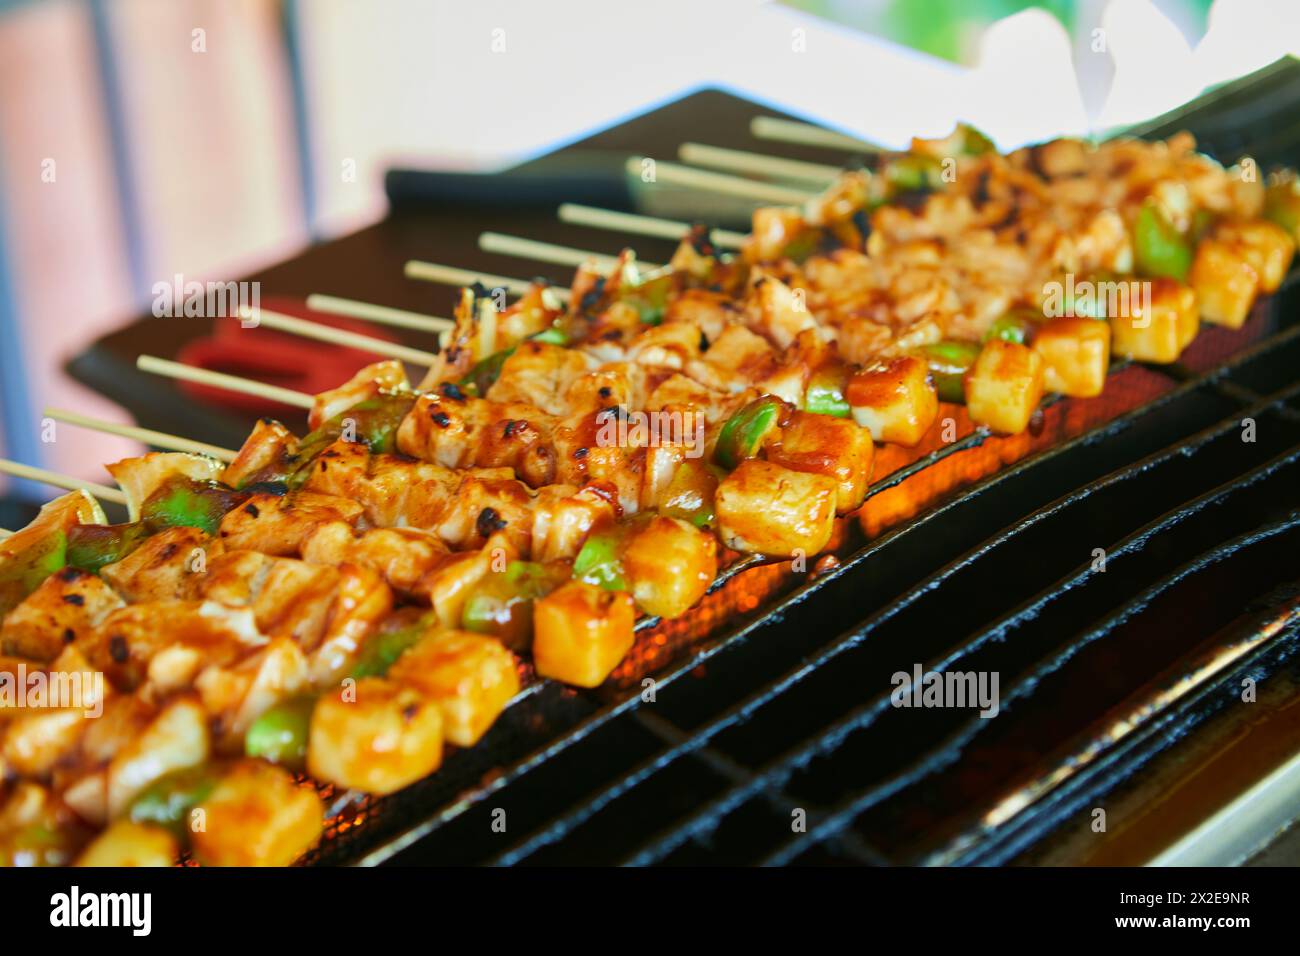 Grilling skewer chicken meat on barbecue grill Stock Photo